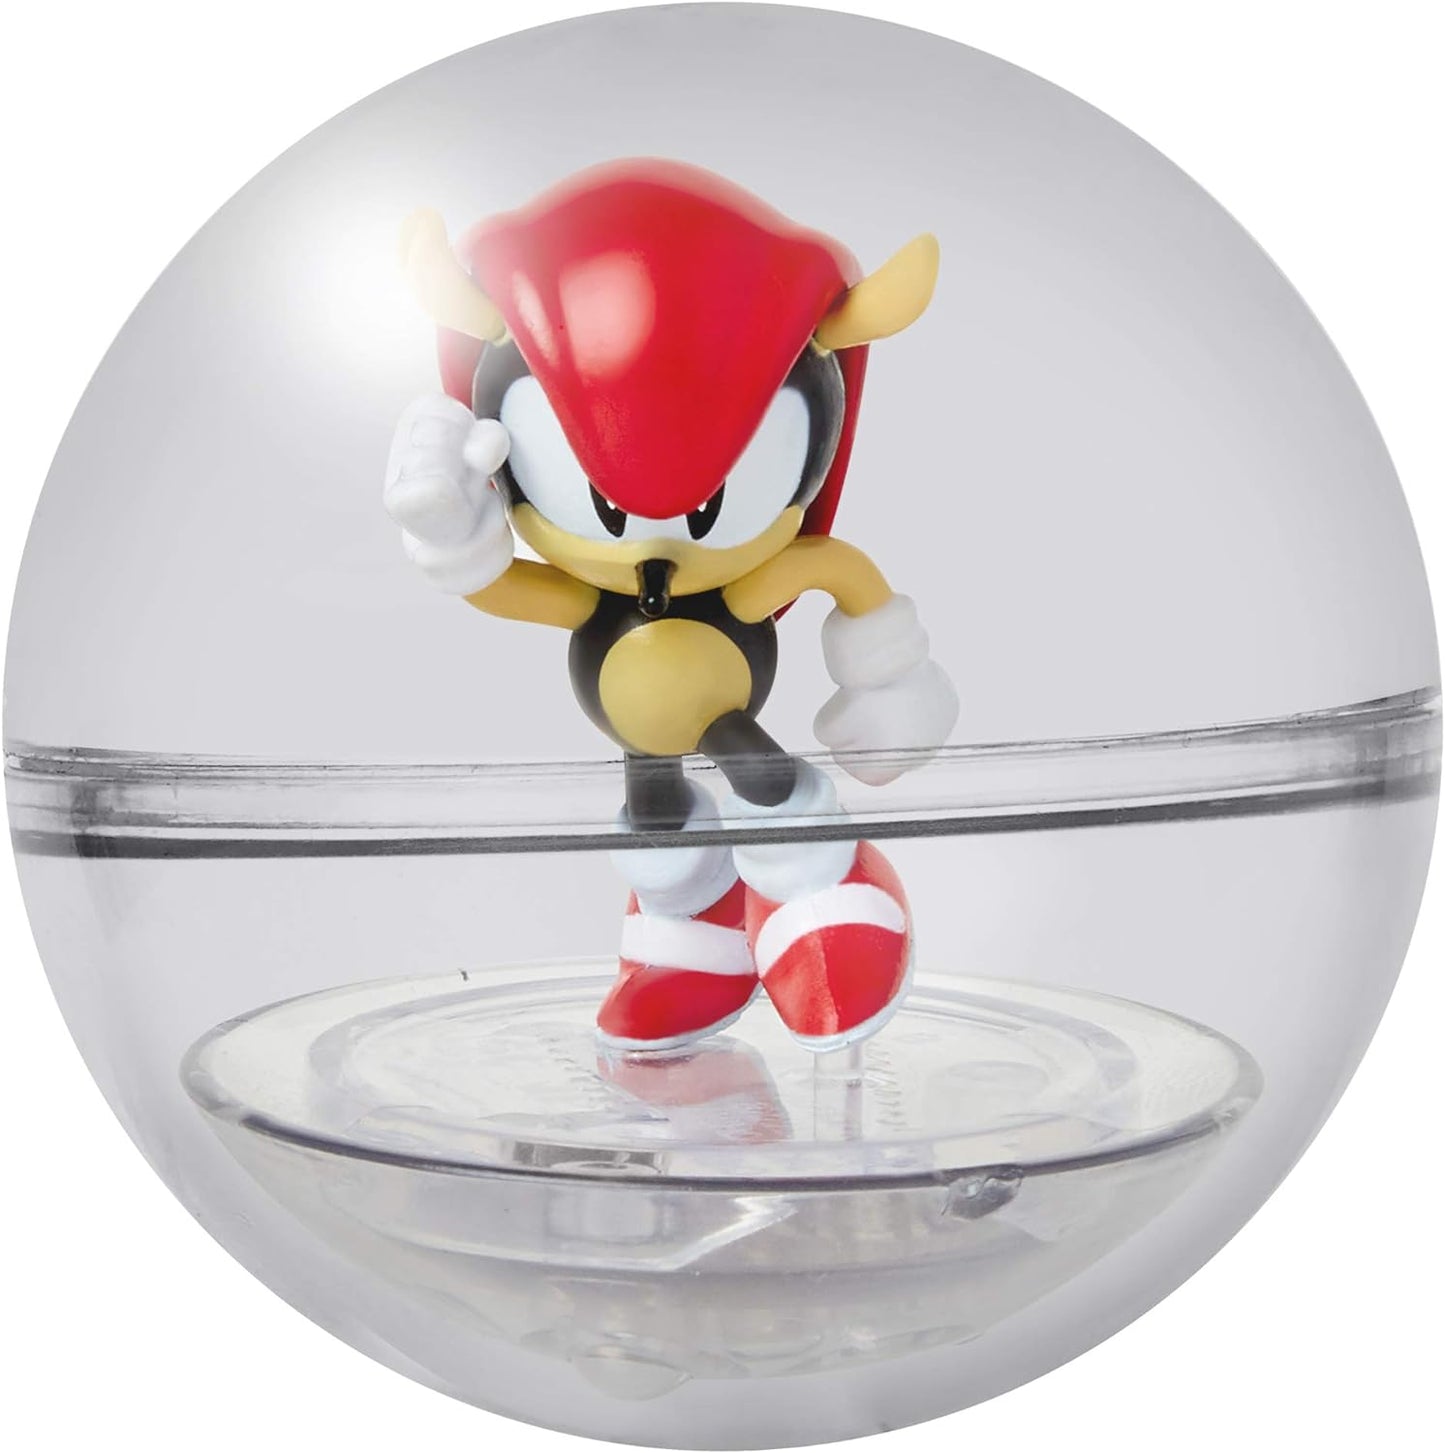 Action Figure - Sonic the Hedgehog - Sonic Sphere - Mighty - 2 Inch - Wave 1